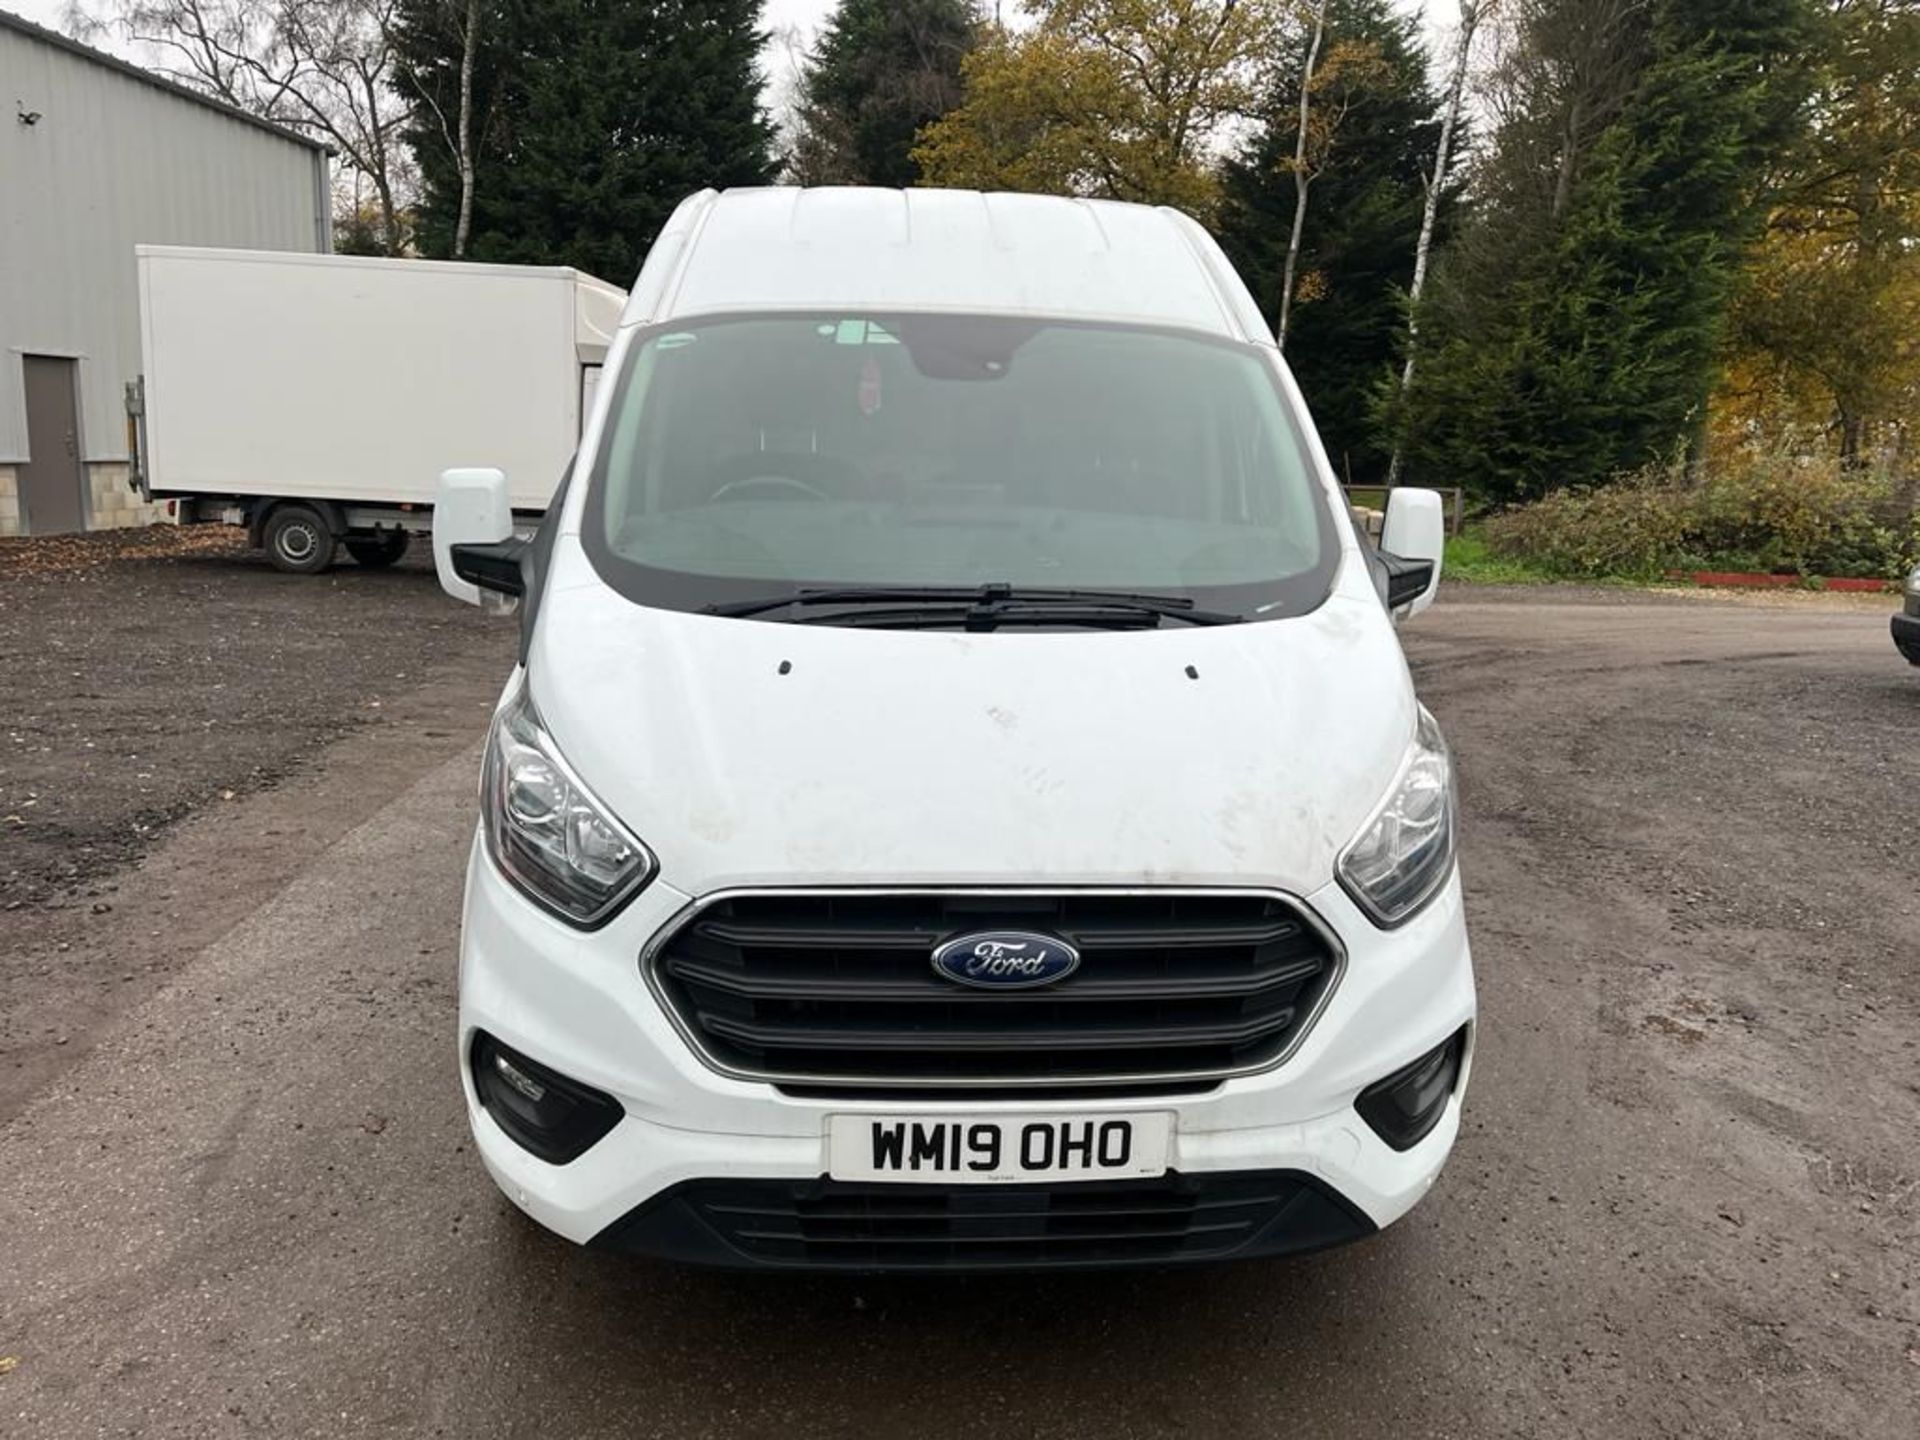 2019 19 ford Transit custom limited high roof - 87k miles - air con - alloy wheels - ply lined - Image 2 of 9